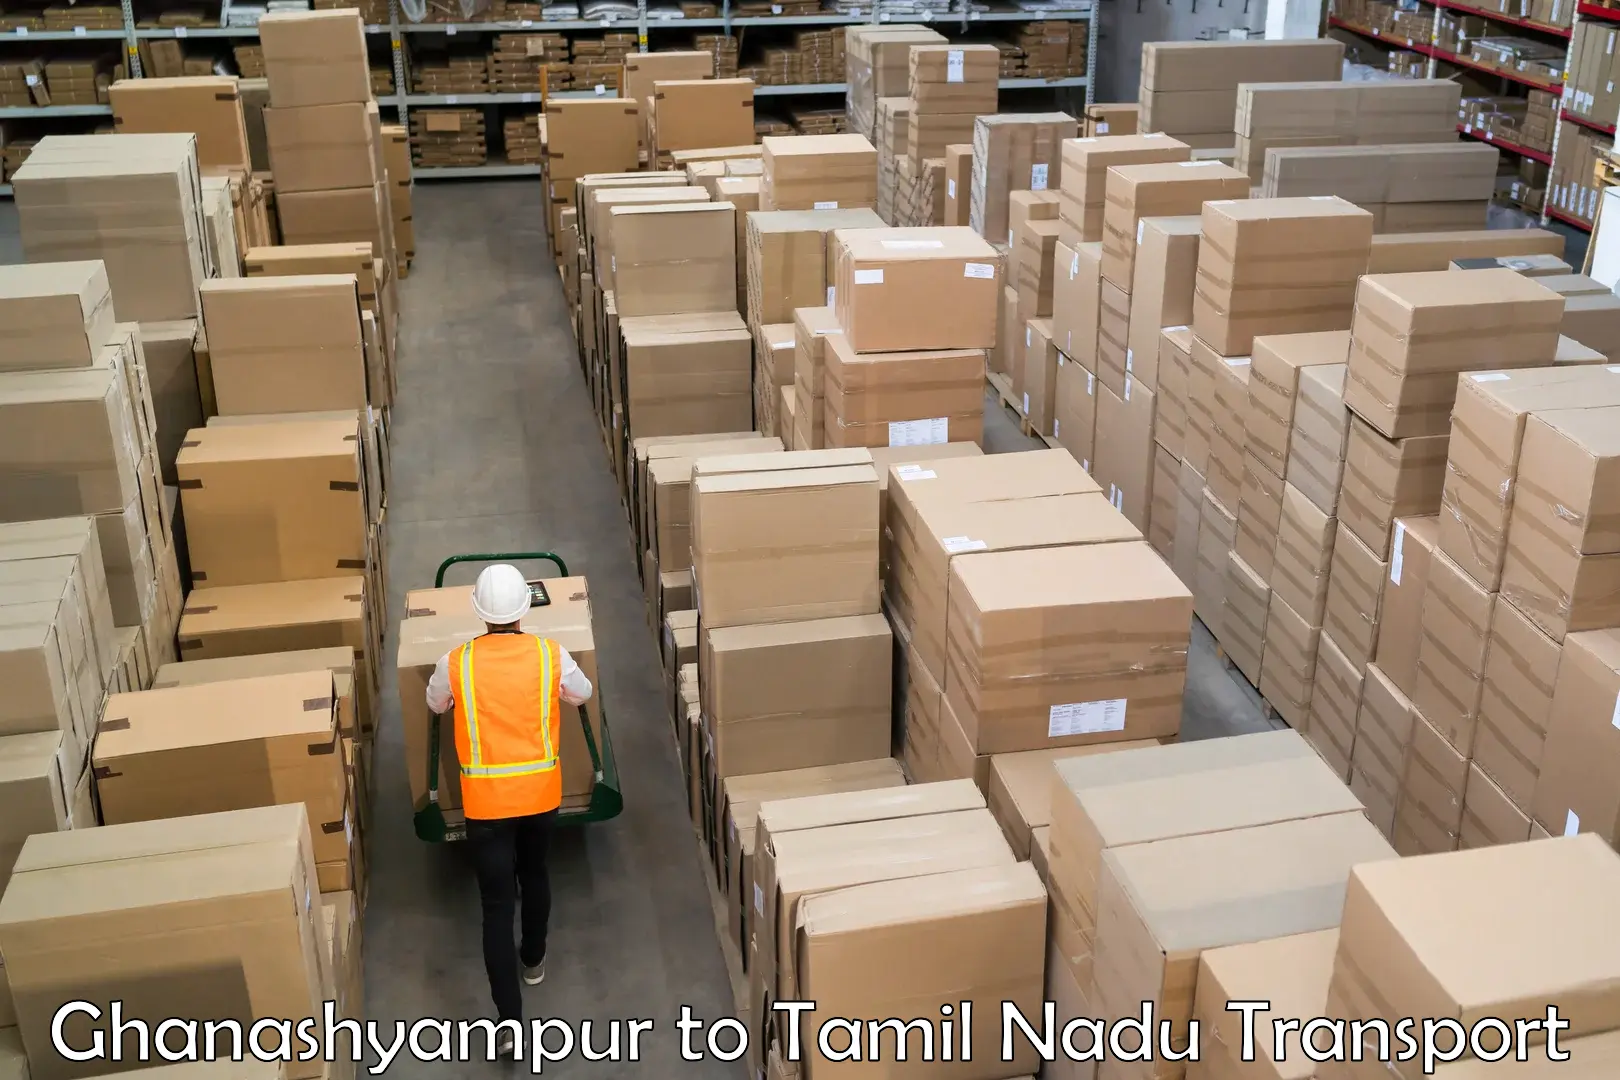 Goods delivery service Ghanashyampur to Cuddalore